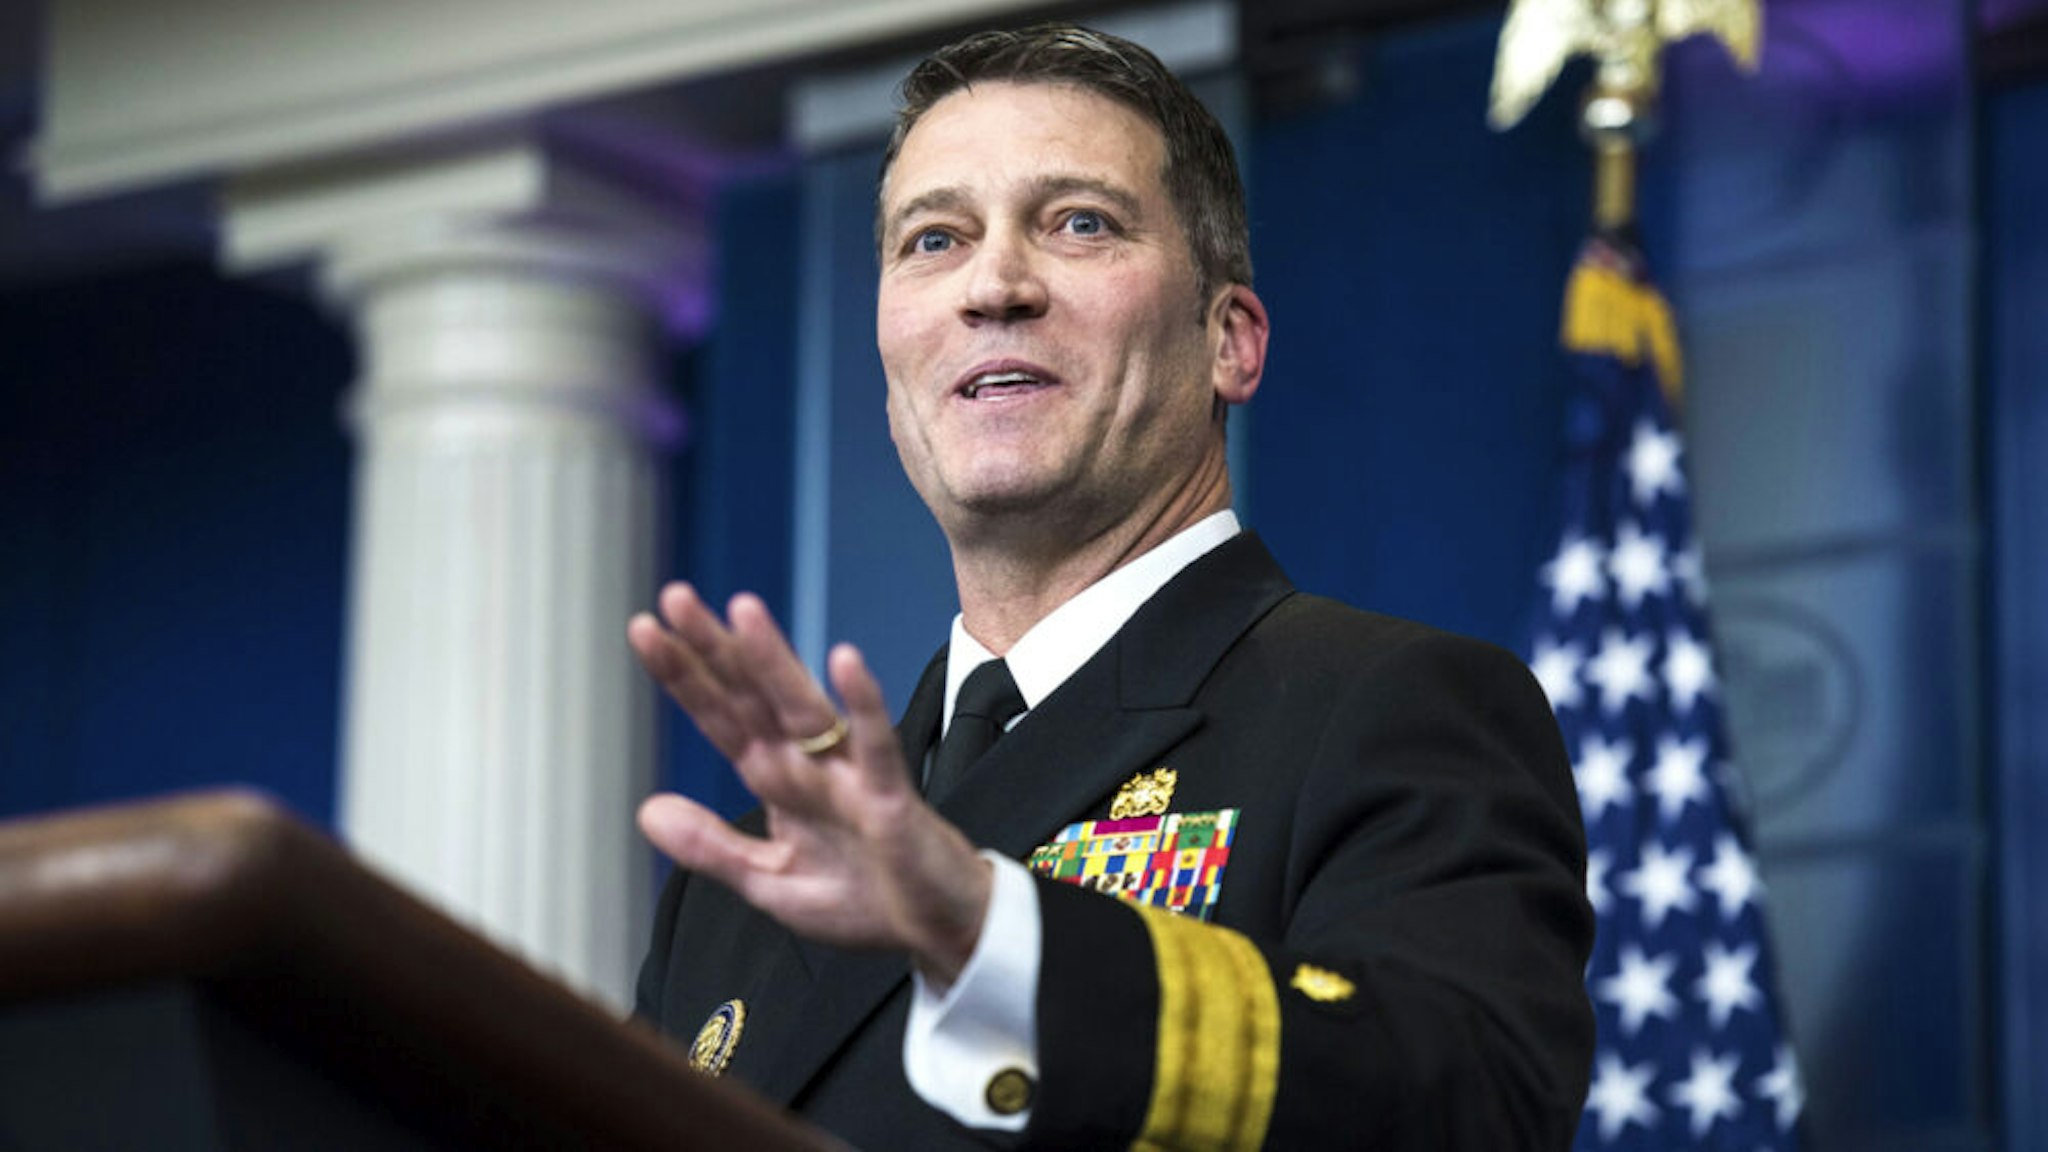 WASHINGTON, DC - JANUARY 16: White House physician Dr. Ronny Jackson speaks to reporters during the daily briefing in the Brady press briefing room at the White House in Washington, DC on Tuesday, Jan. 16, 2018.